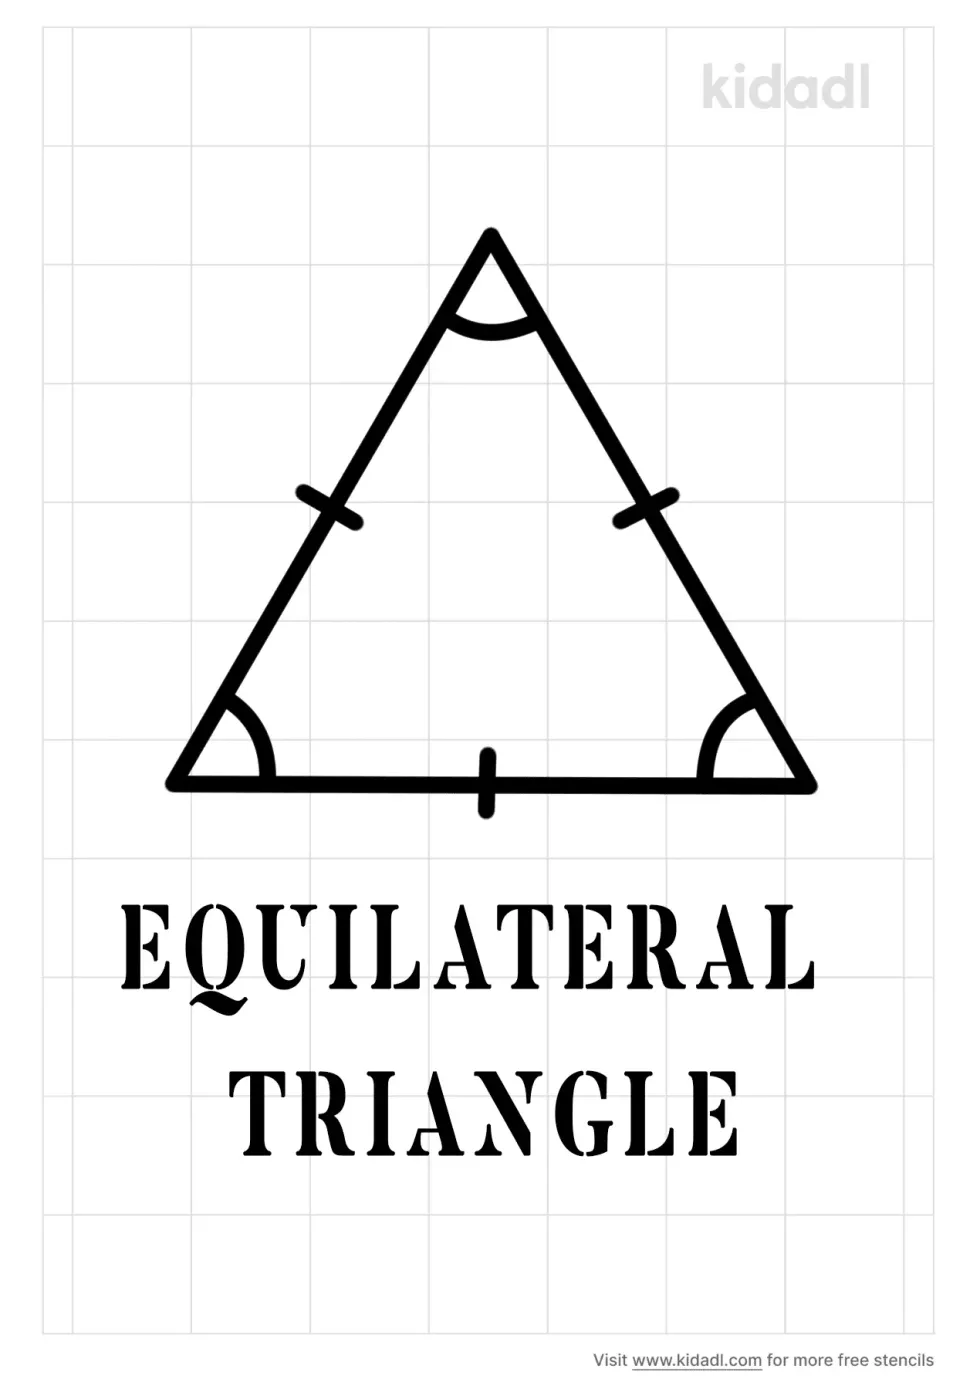 Equilateral Triangle Stencil